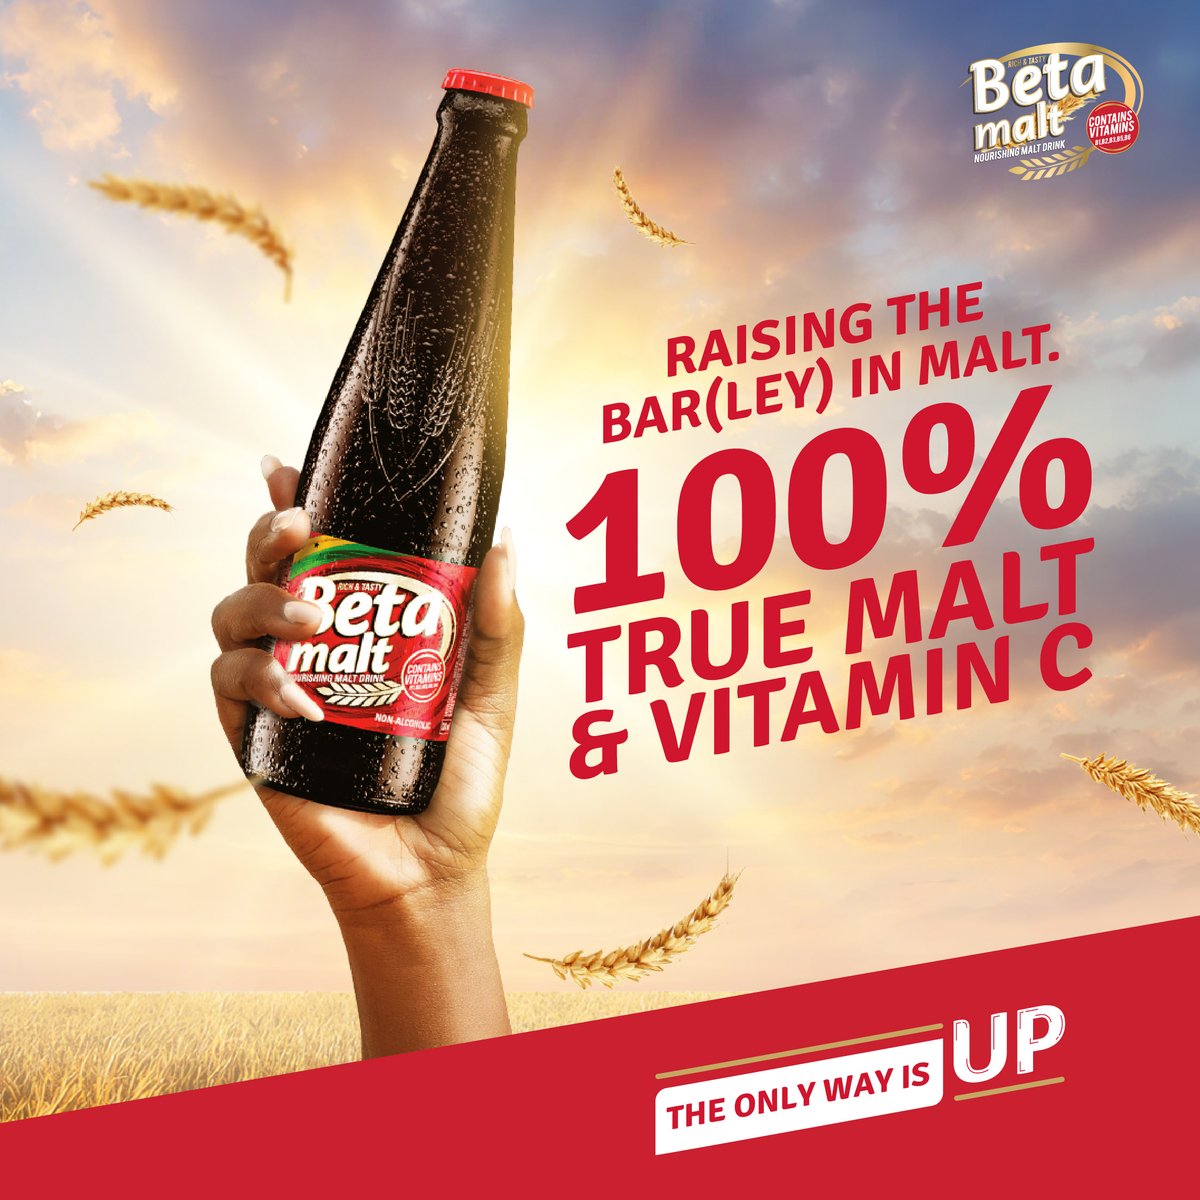 We are setting the standard in the world of malt! Elevate your taste experience with our 100% true malt blend, enriched with Vitamin C for that extra goodness.

#Betamalt #discoverrichness #100percentTrueMalt